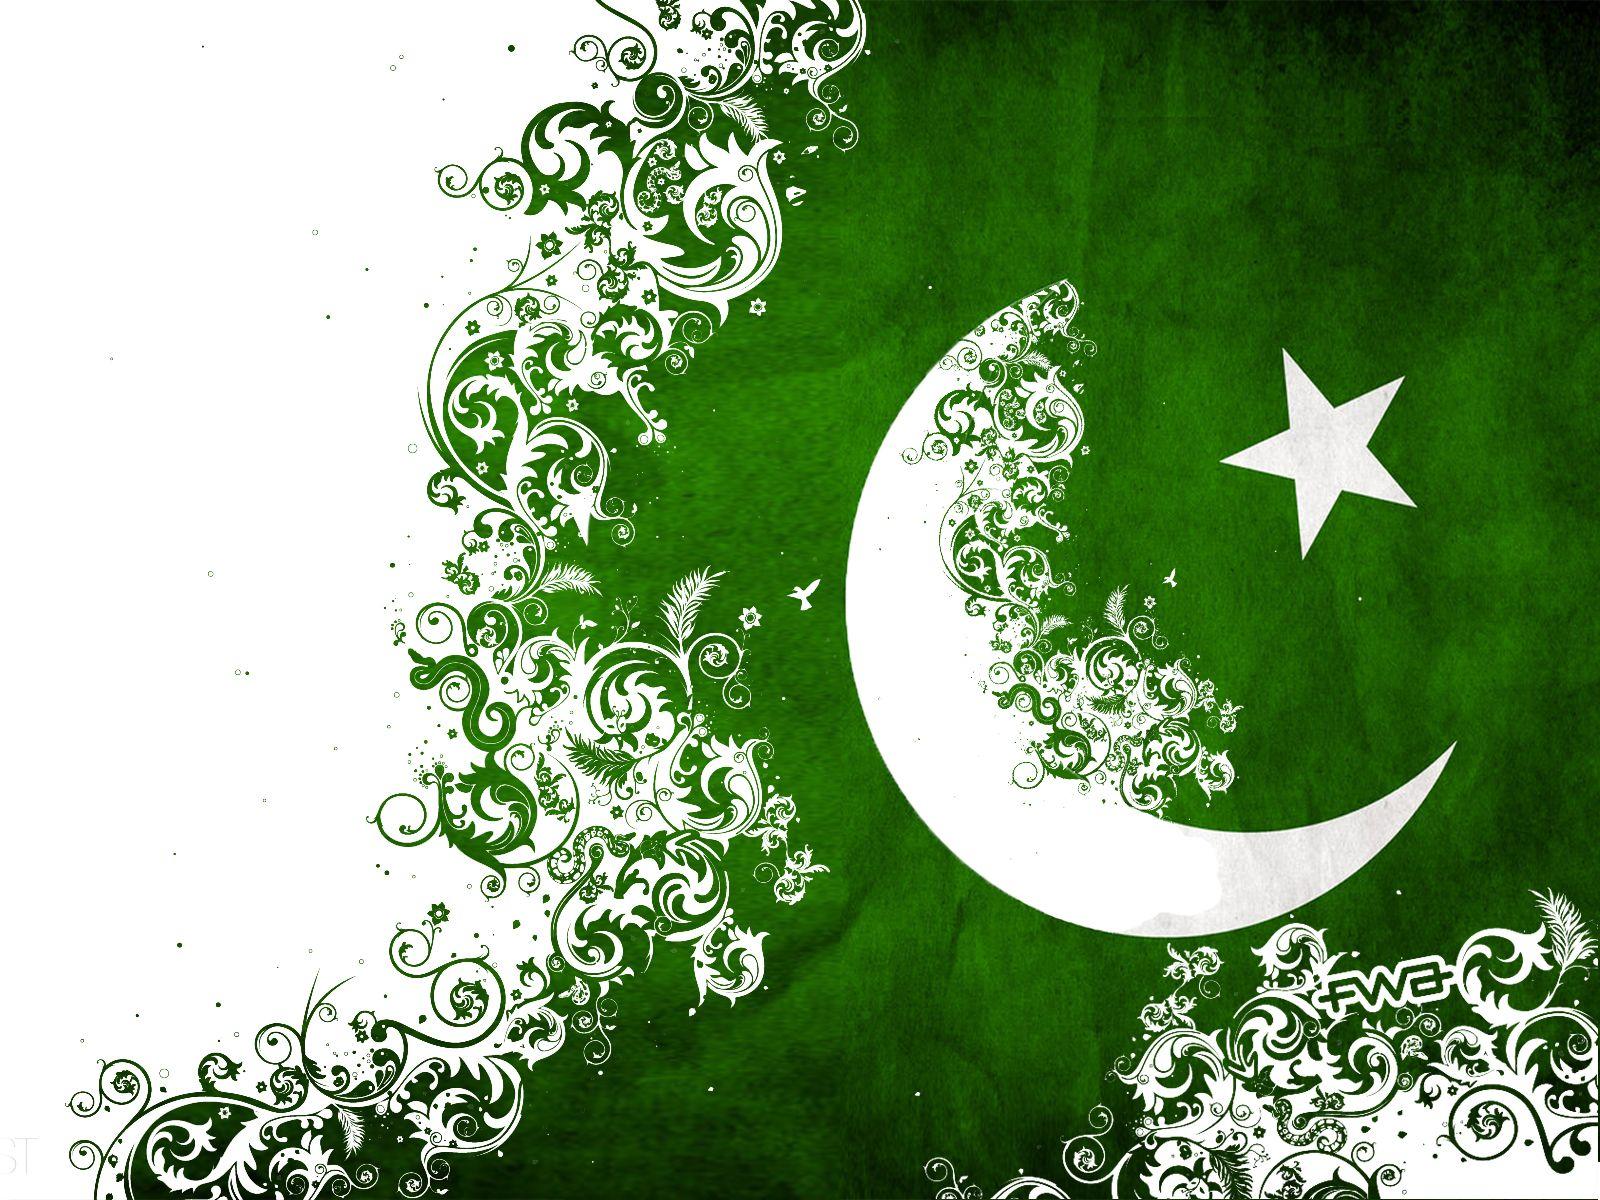 Download Pakistan Wallpaper, With Complete Pakistani Culture